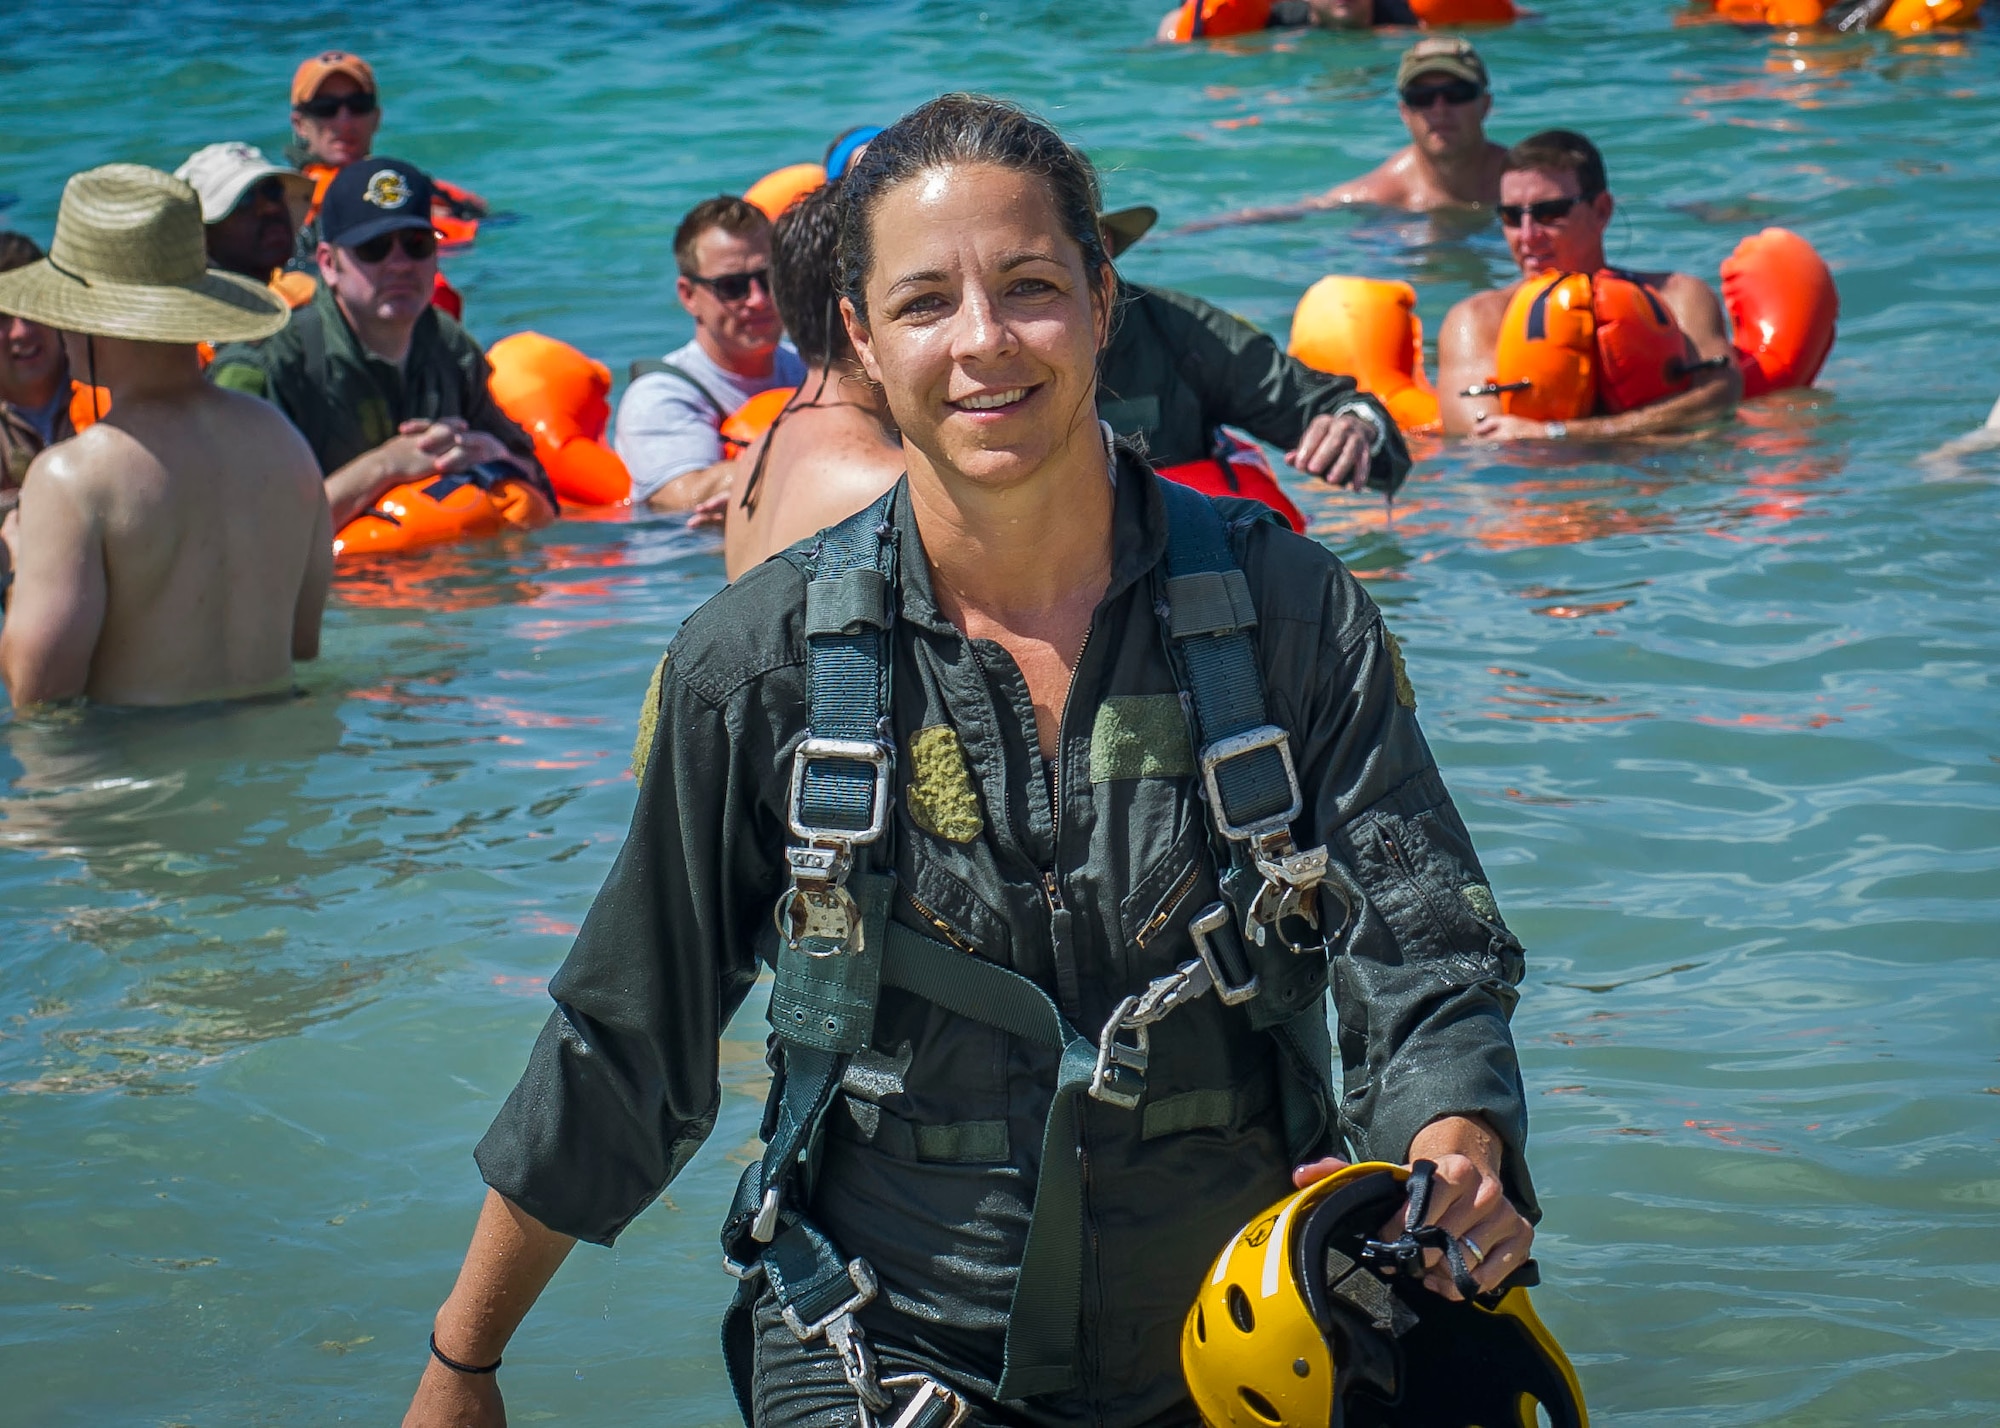 Airmen prepare to conduct a body drag during a water survival exercise June 27, 2015, at Naval Air Station Key West, Fla. More than 90 Airmen from the 300th Airlift Squadron deployed for a mass exercise that involved accomplished more than 500 training tasks. (U.S. Air Force photo by Senior Airman Tom Brading)